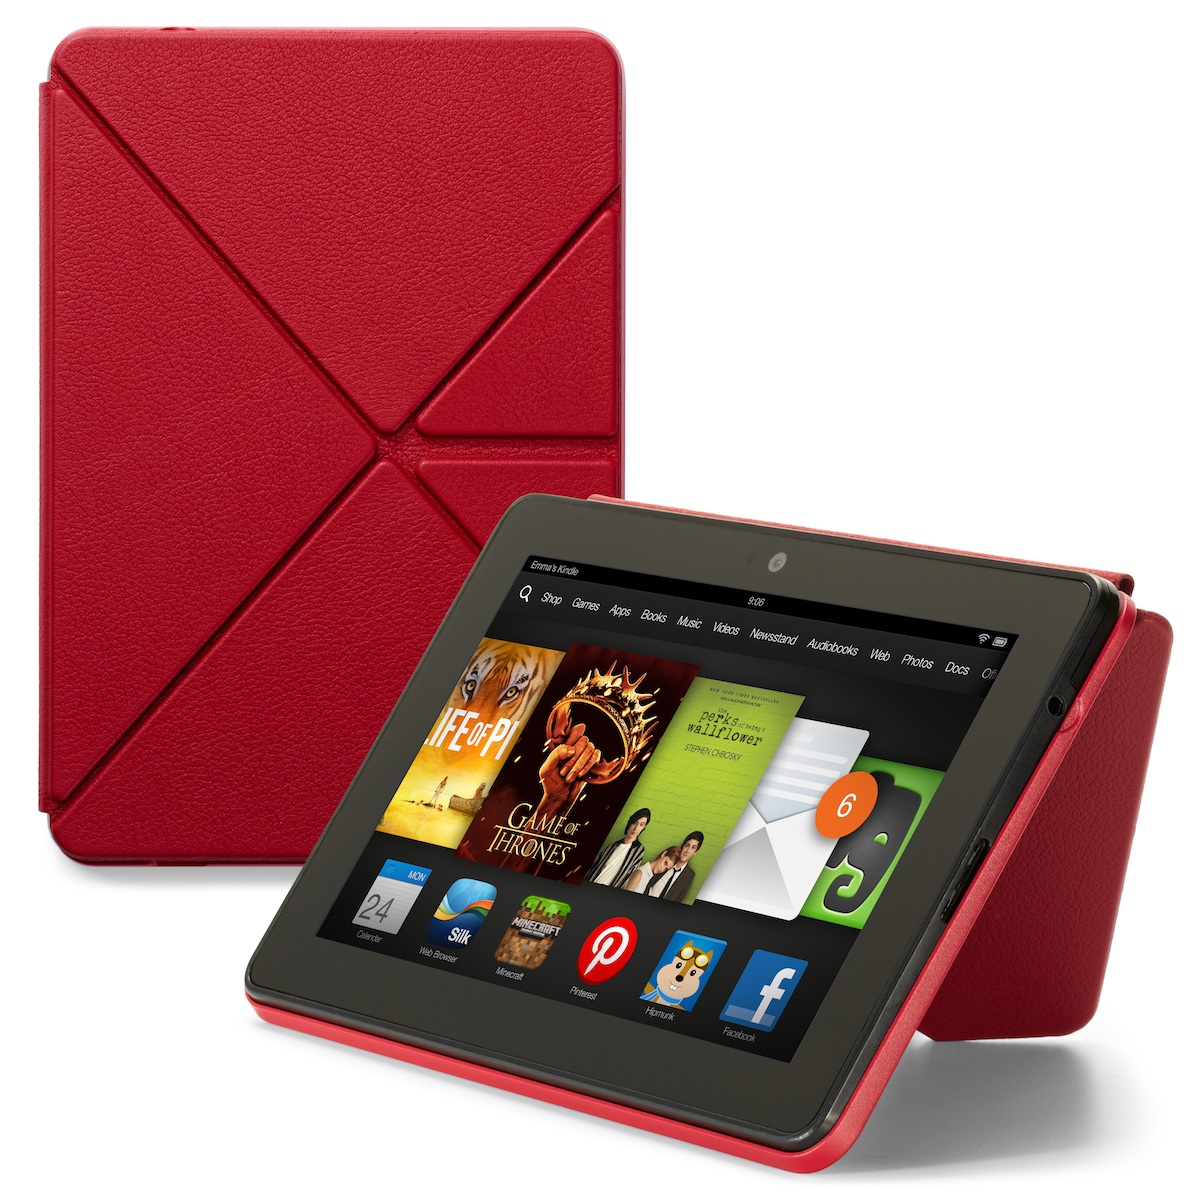 Origami Tablet Case First Look Amazons Kindle Fire Origami Stand In Action Geekwire